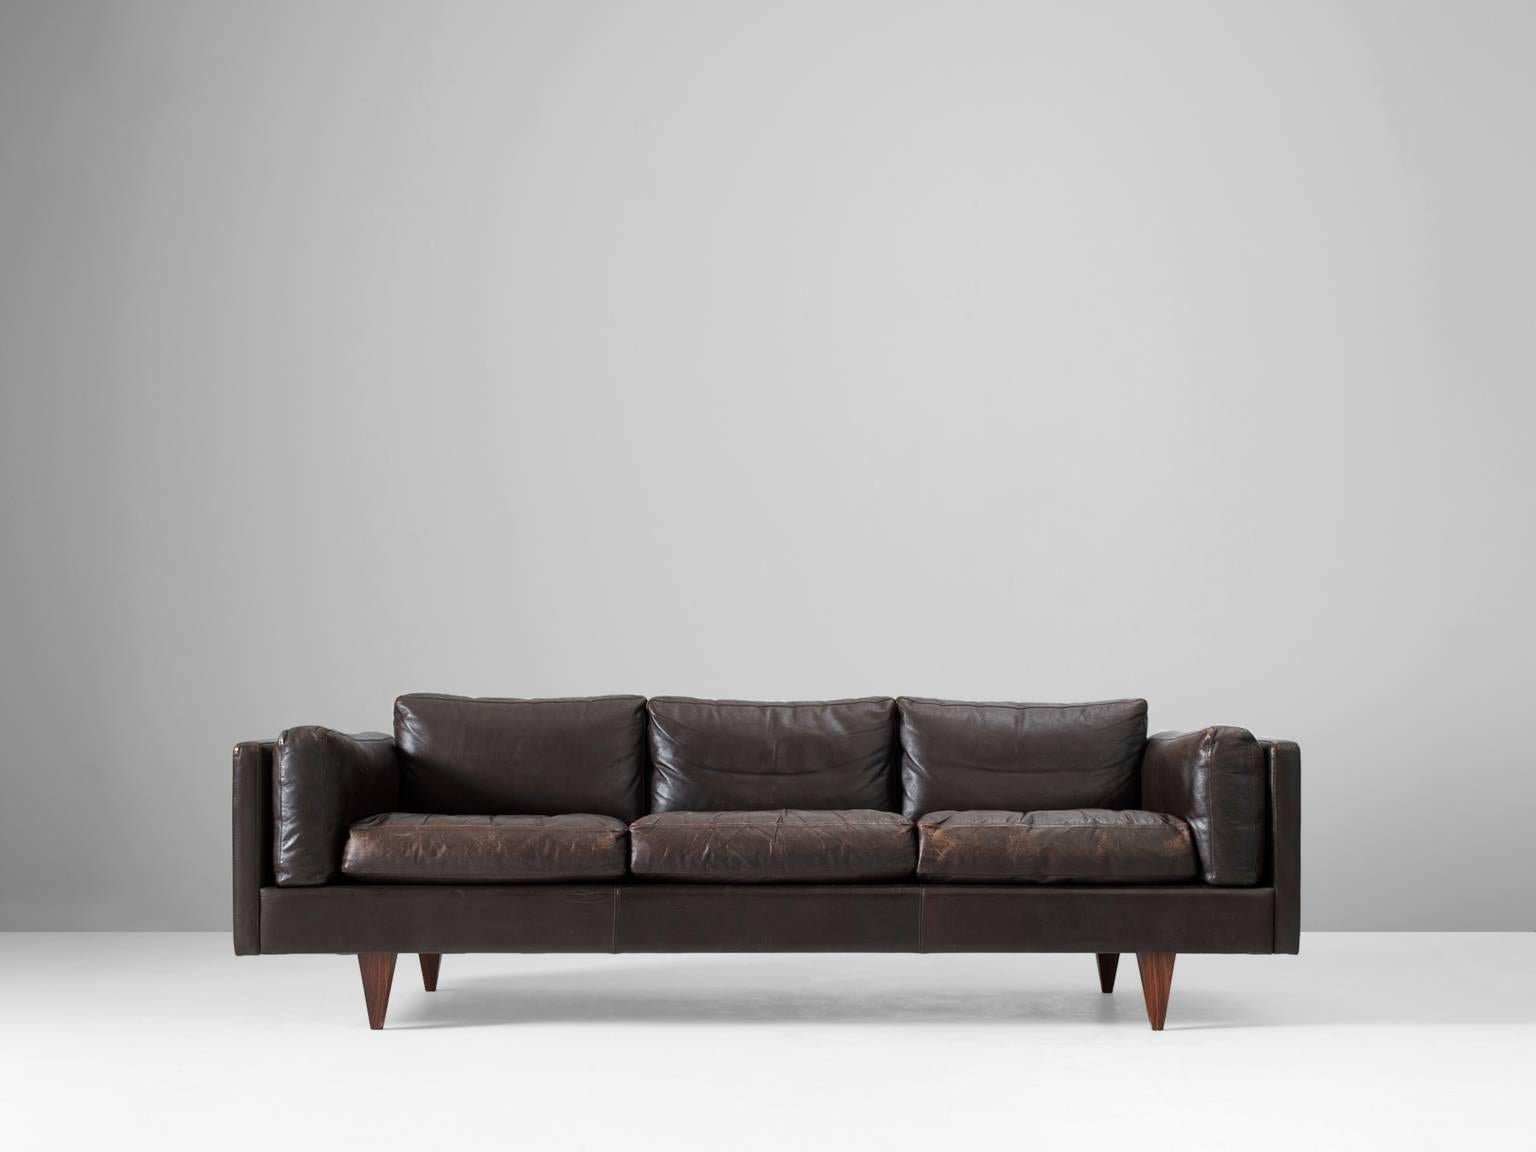 Three-seater sofa, brown leather and wood, by Illum Wikkelso, Denmark 1960s. 

This sofa is one of the best mid-century designs to be found in Denmark. It shows great craftsmanship and is in a wonderful condition. Due to the luxurious down filled